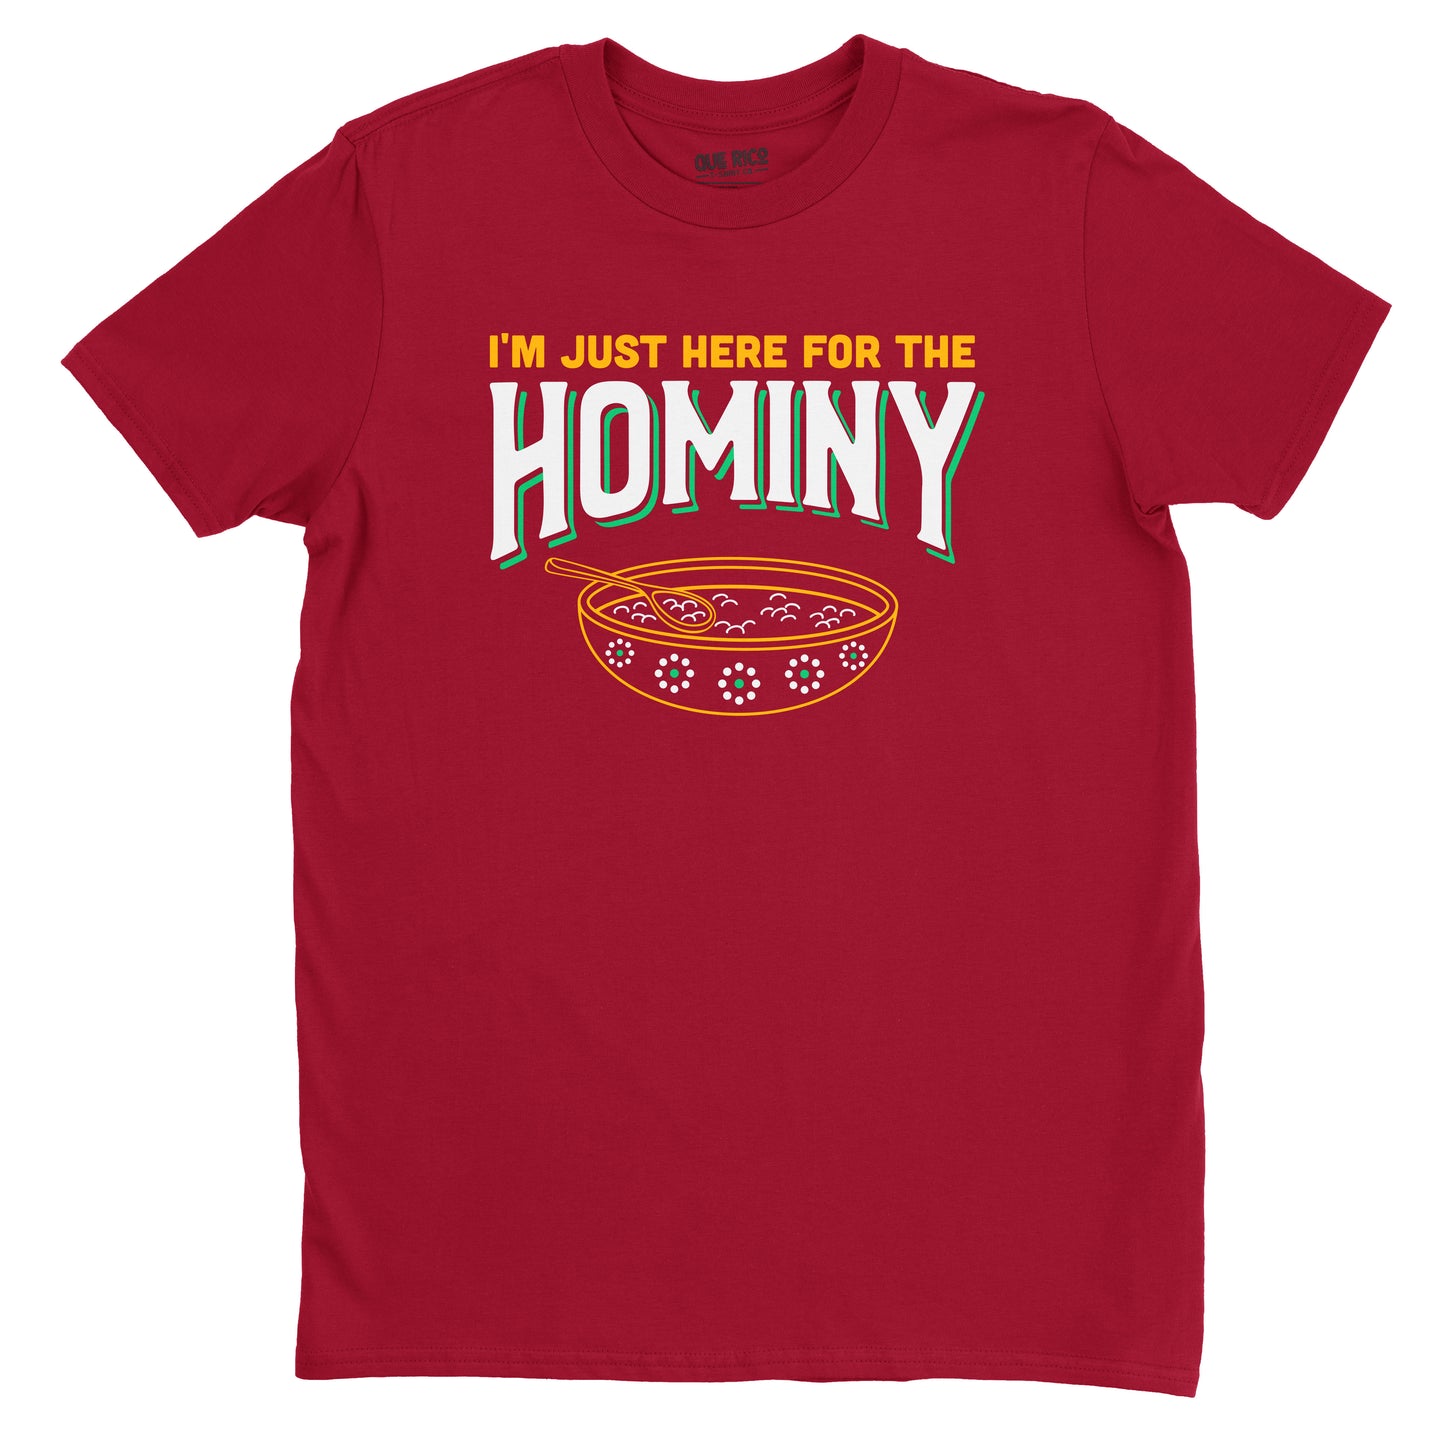 I'm Just Here for the Hominy